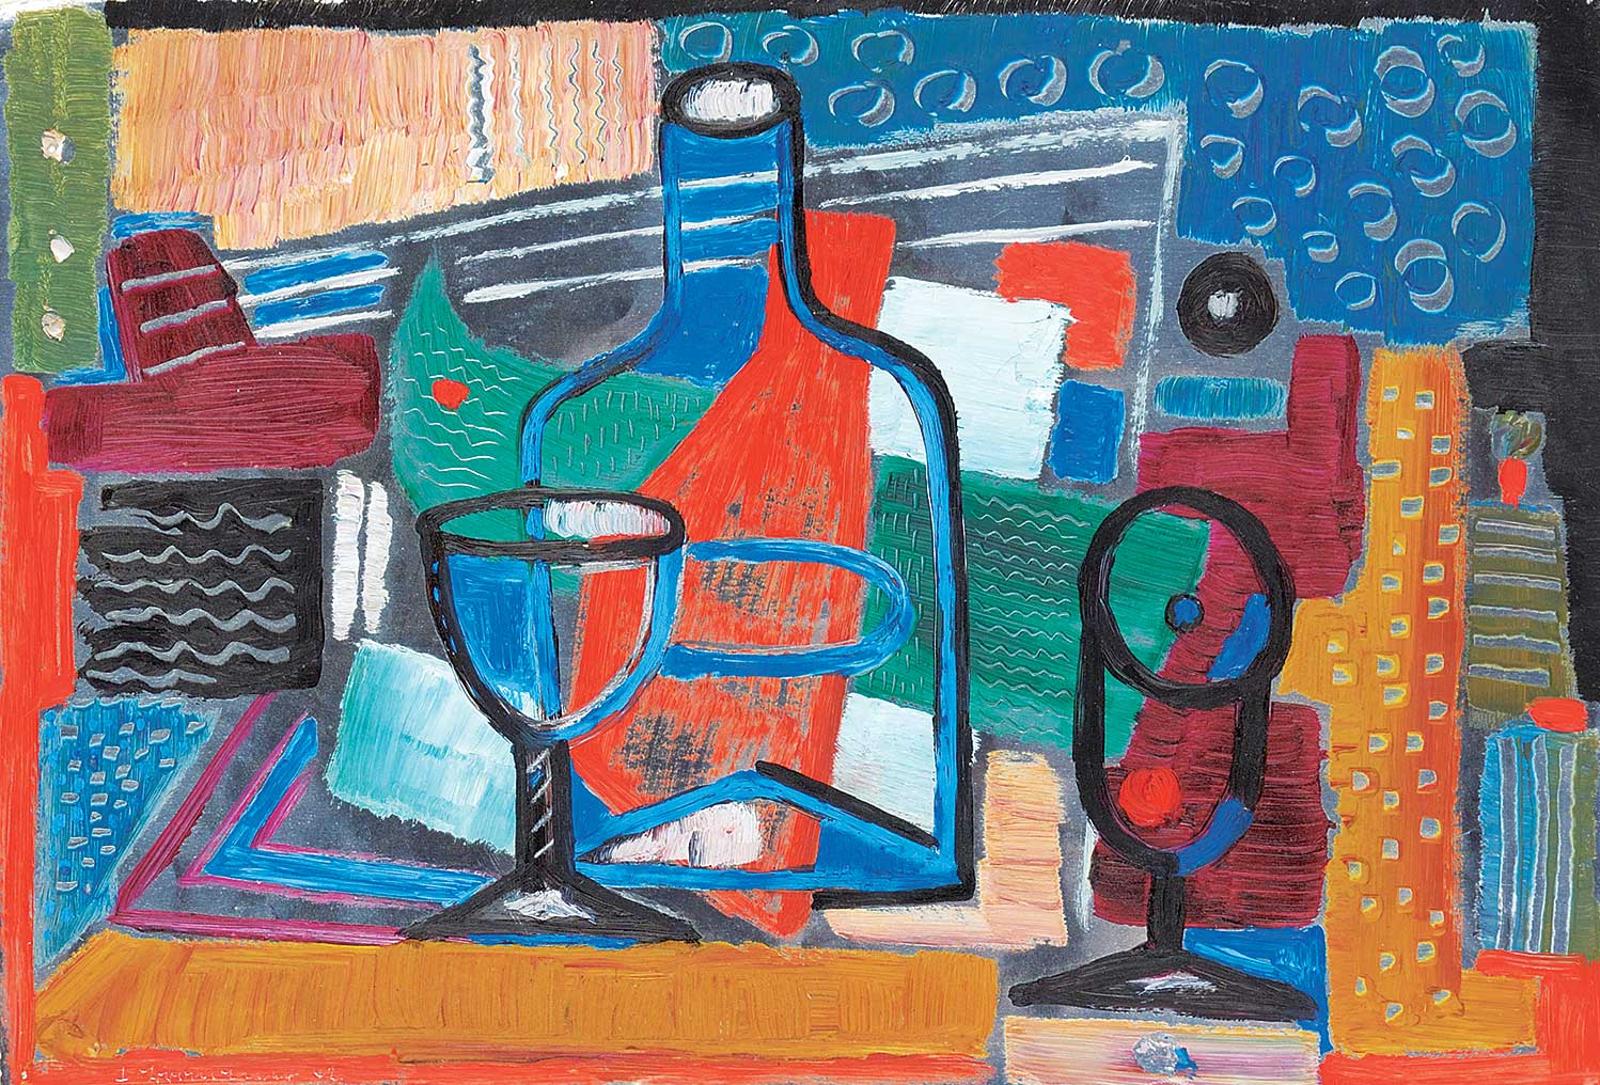 Friedrich Wilhelm (Fritz) Brandtner (1896-1969) - Untitled - Abstract with Bottle and Boat